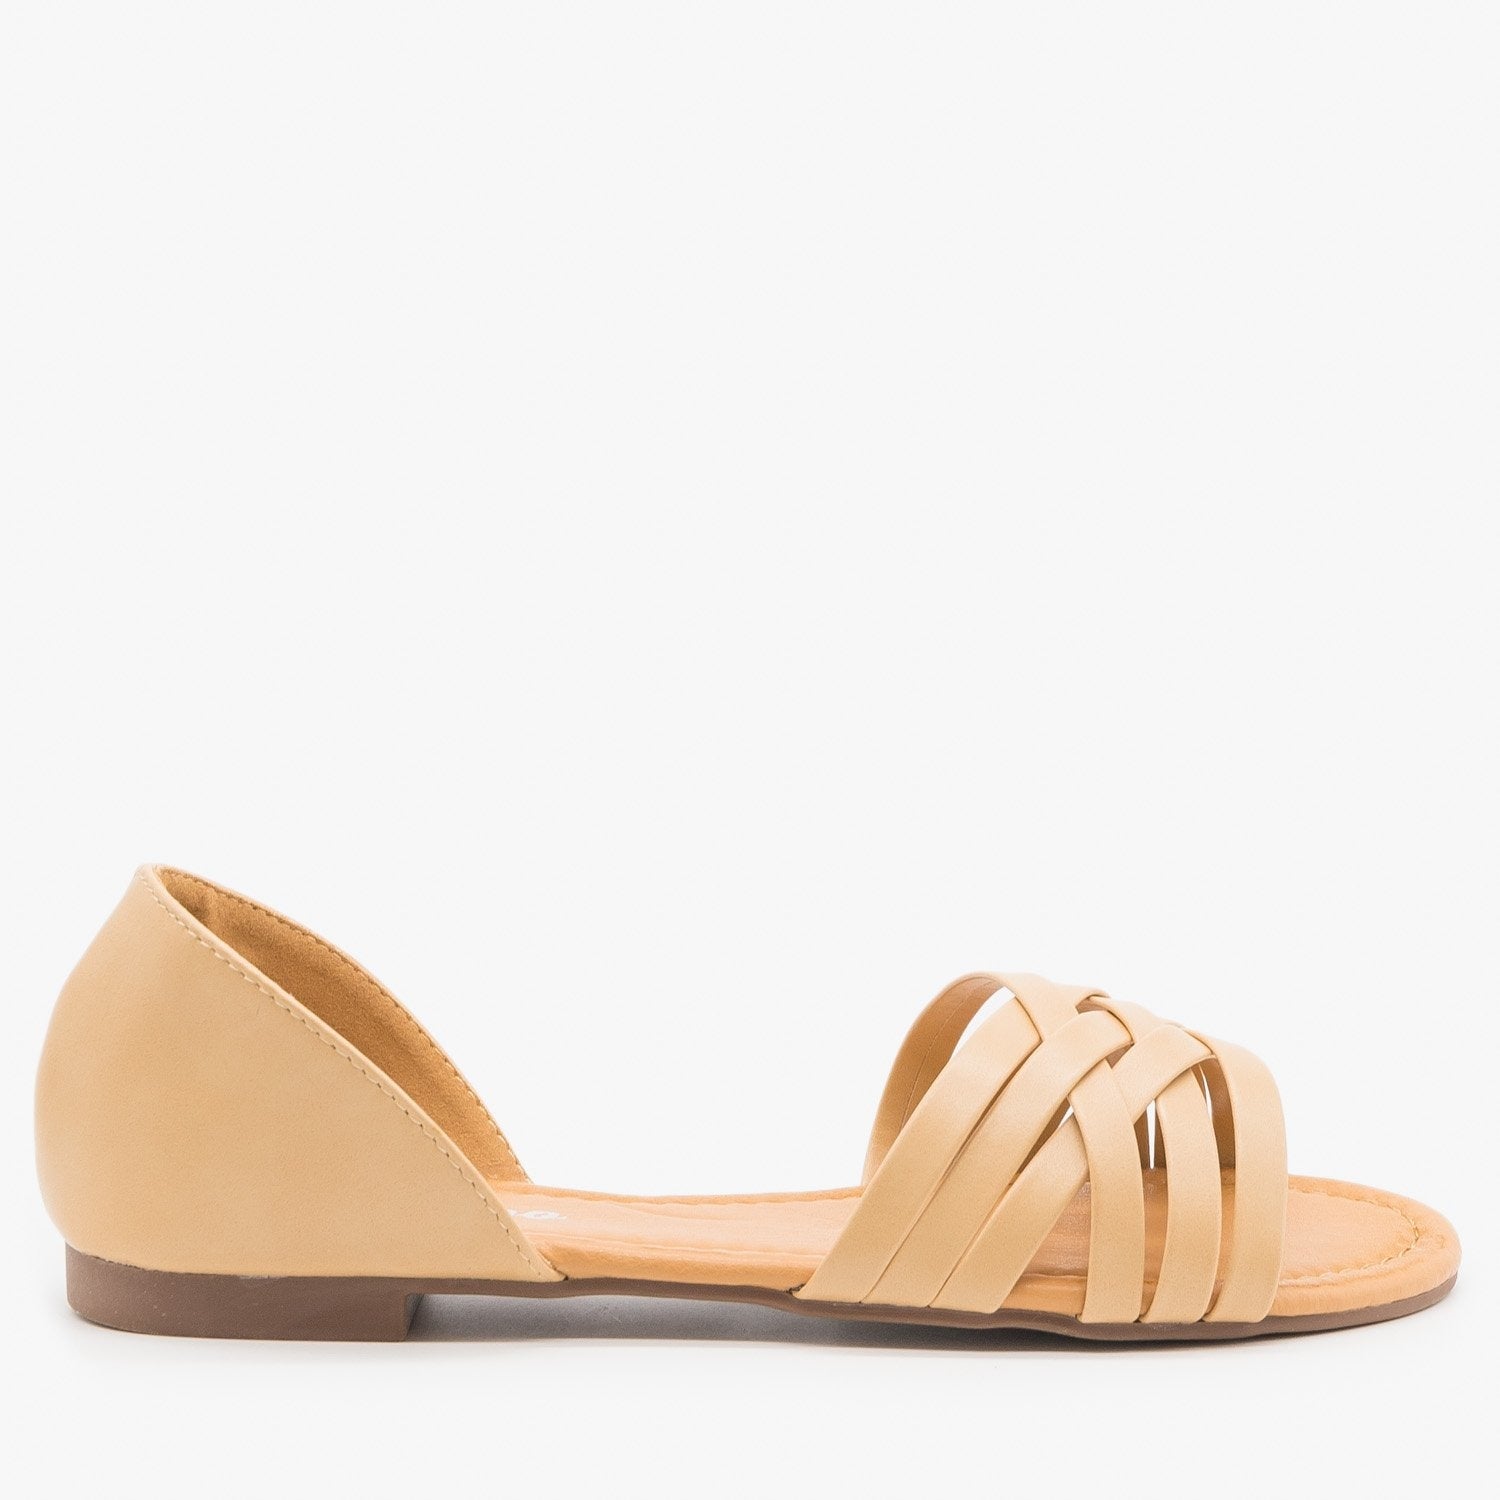 Strappy Open Toe Flats - Weeboo Shoes 